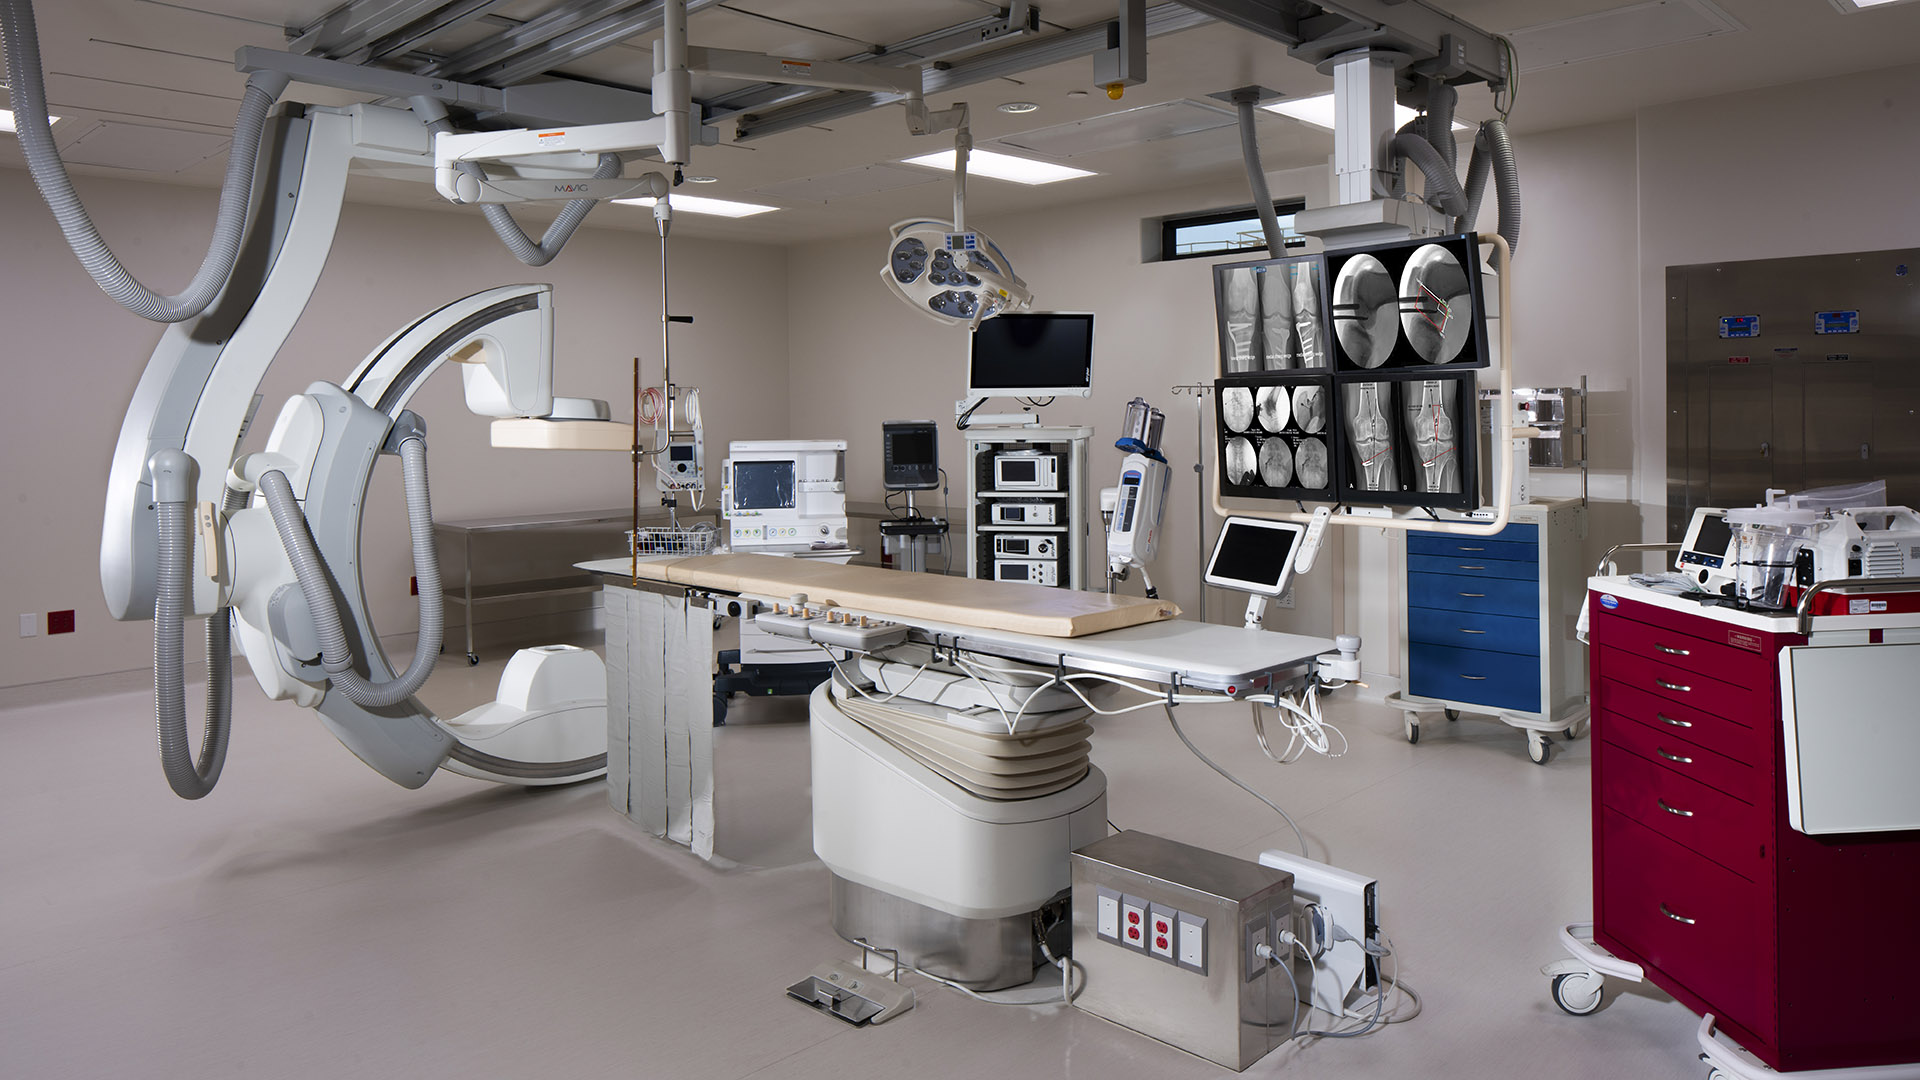 Another operating room at Crovetti Orthopaedics in Nevada